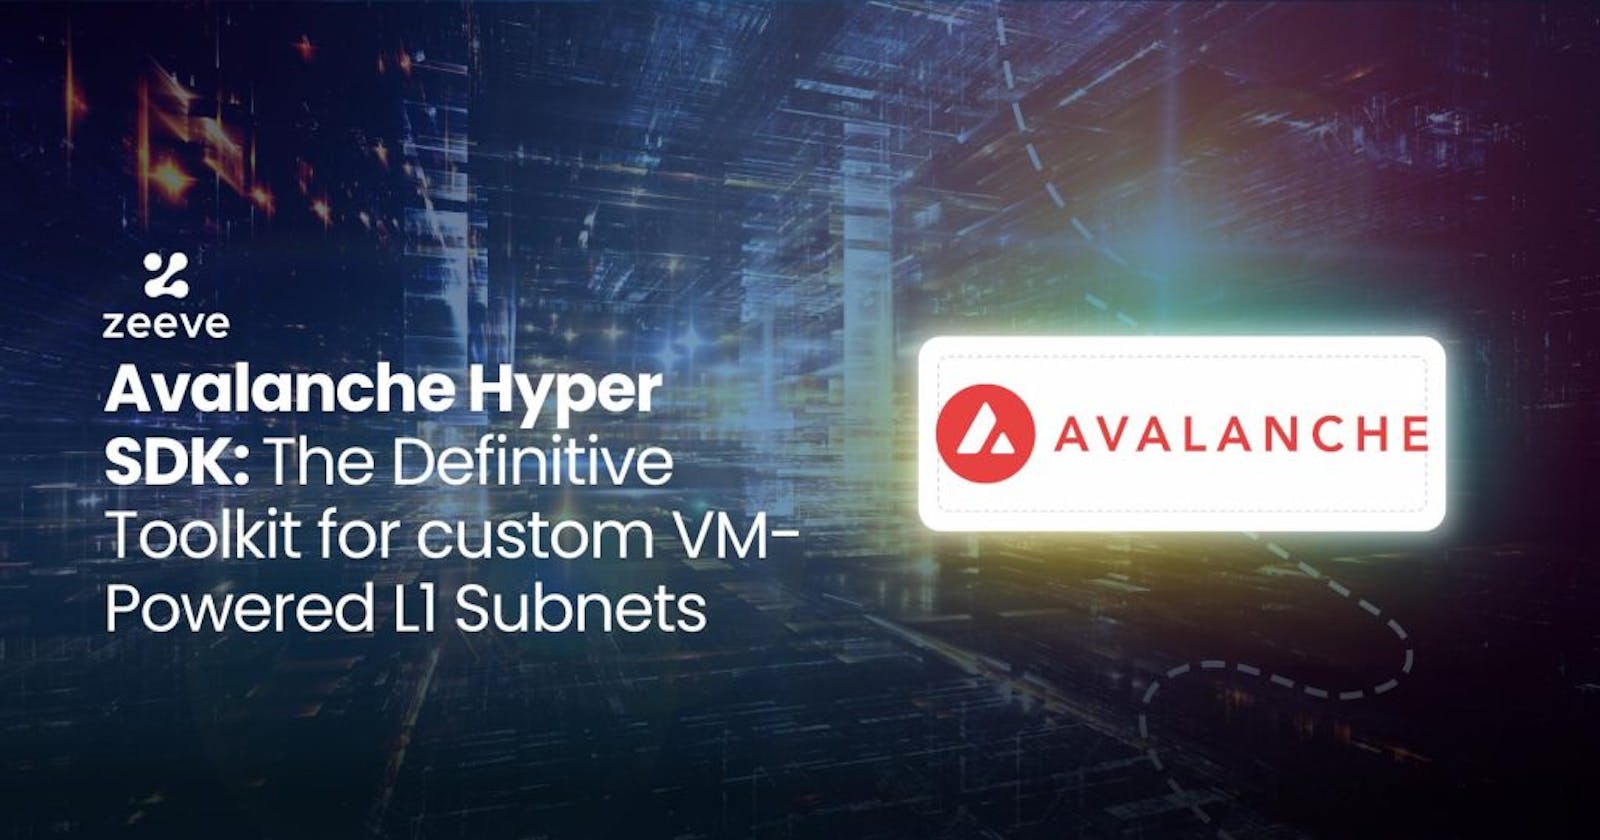 Avalanche HyperSDK: The Definitive Toolkit for Custom VM-Powered Subnets